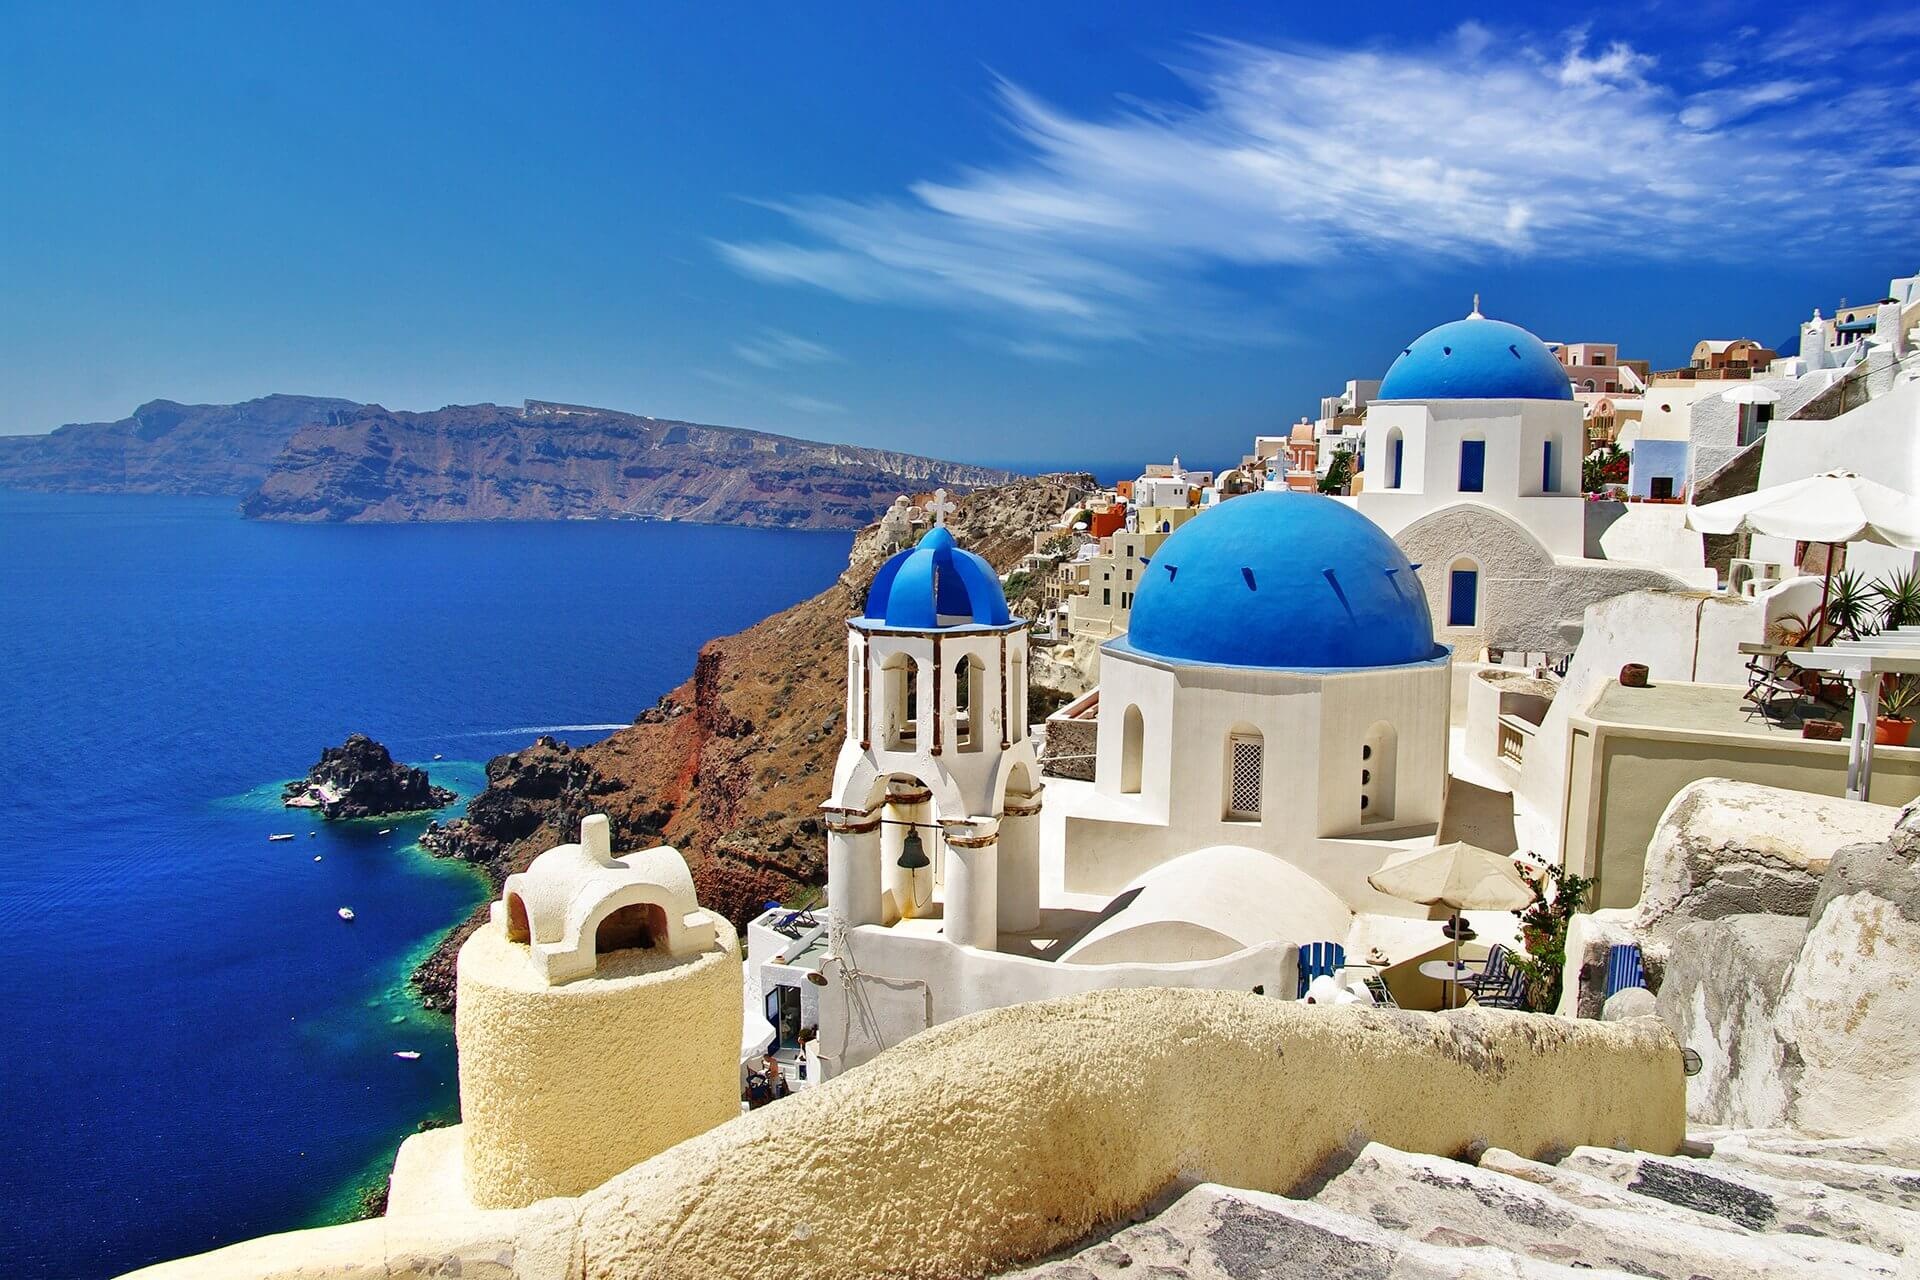 Blue Domes of Oia, Luxury apartments, Santorini accommodations, Exquisite indulgence, 1920x1280 HD Desktop